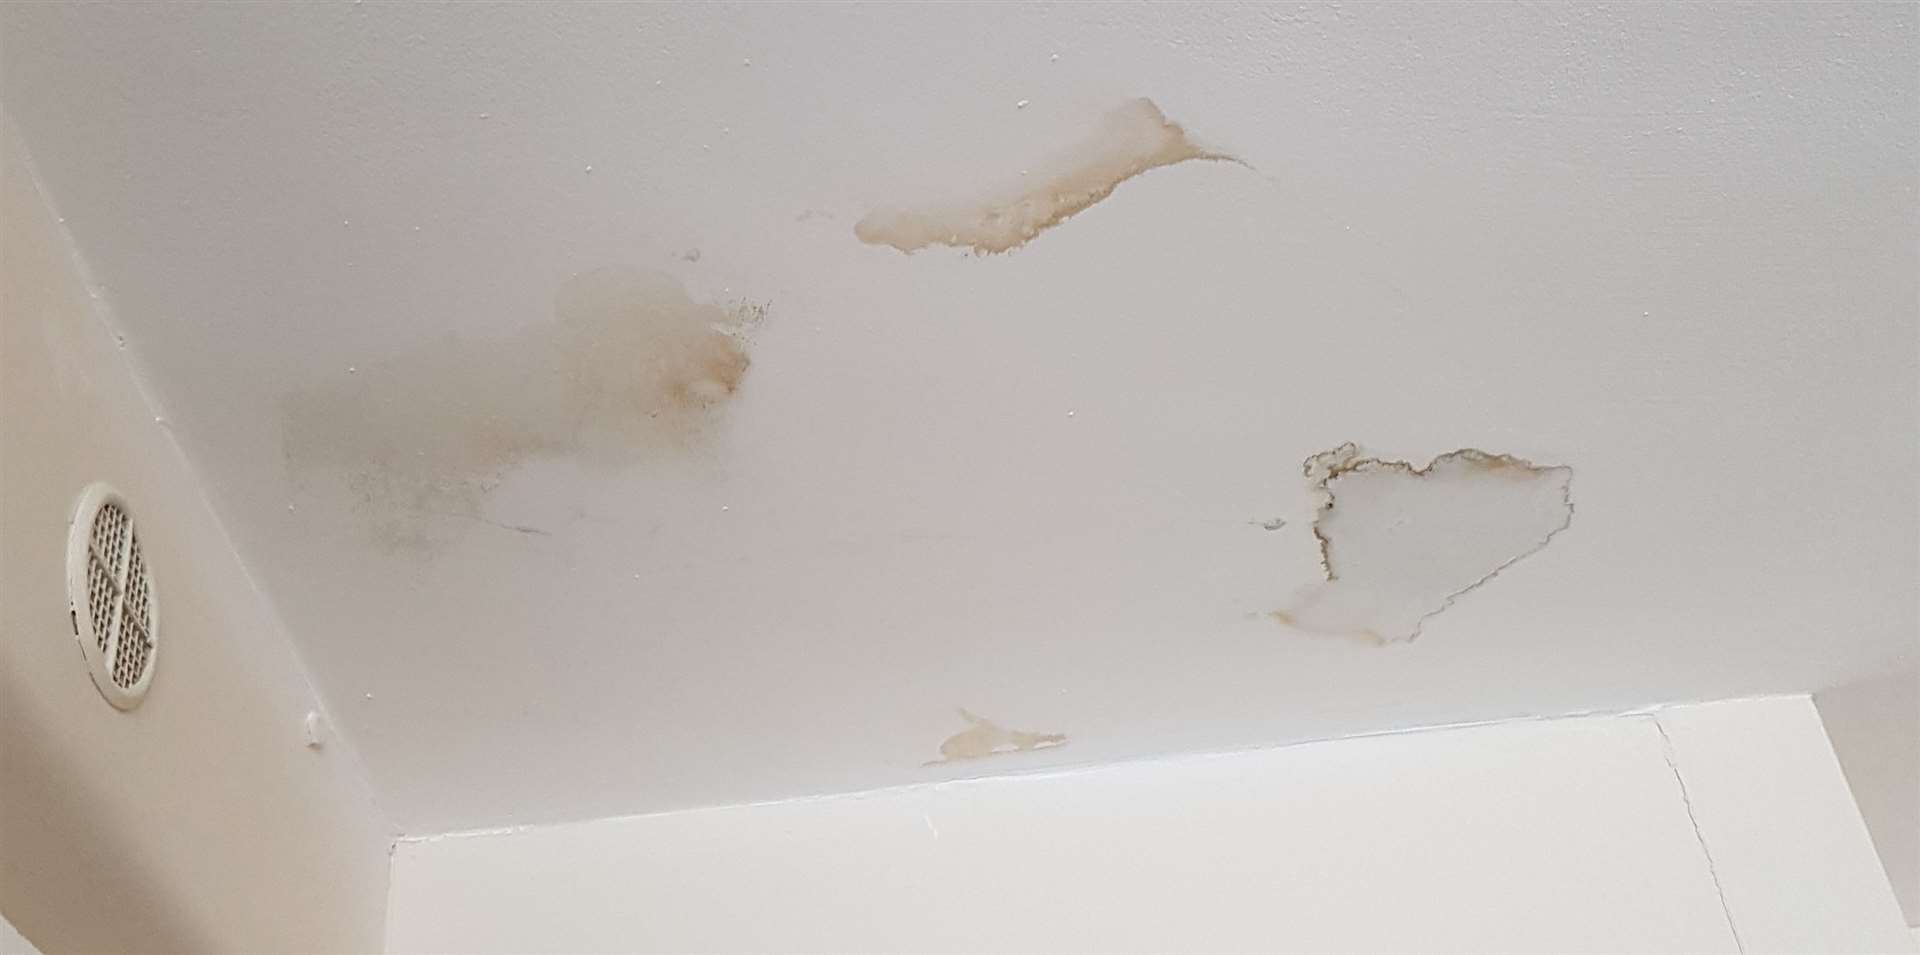 Water damage to Raymond's kitchen ceiling